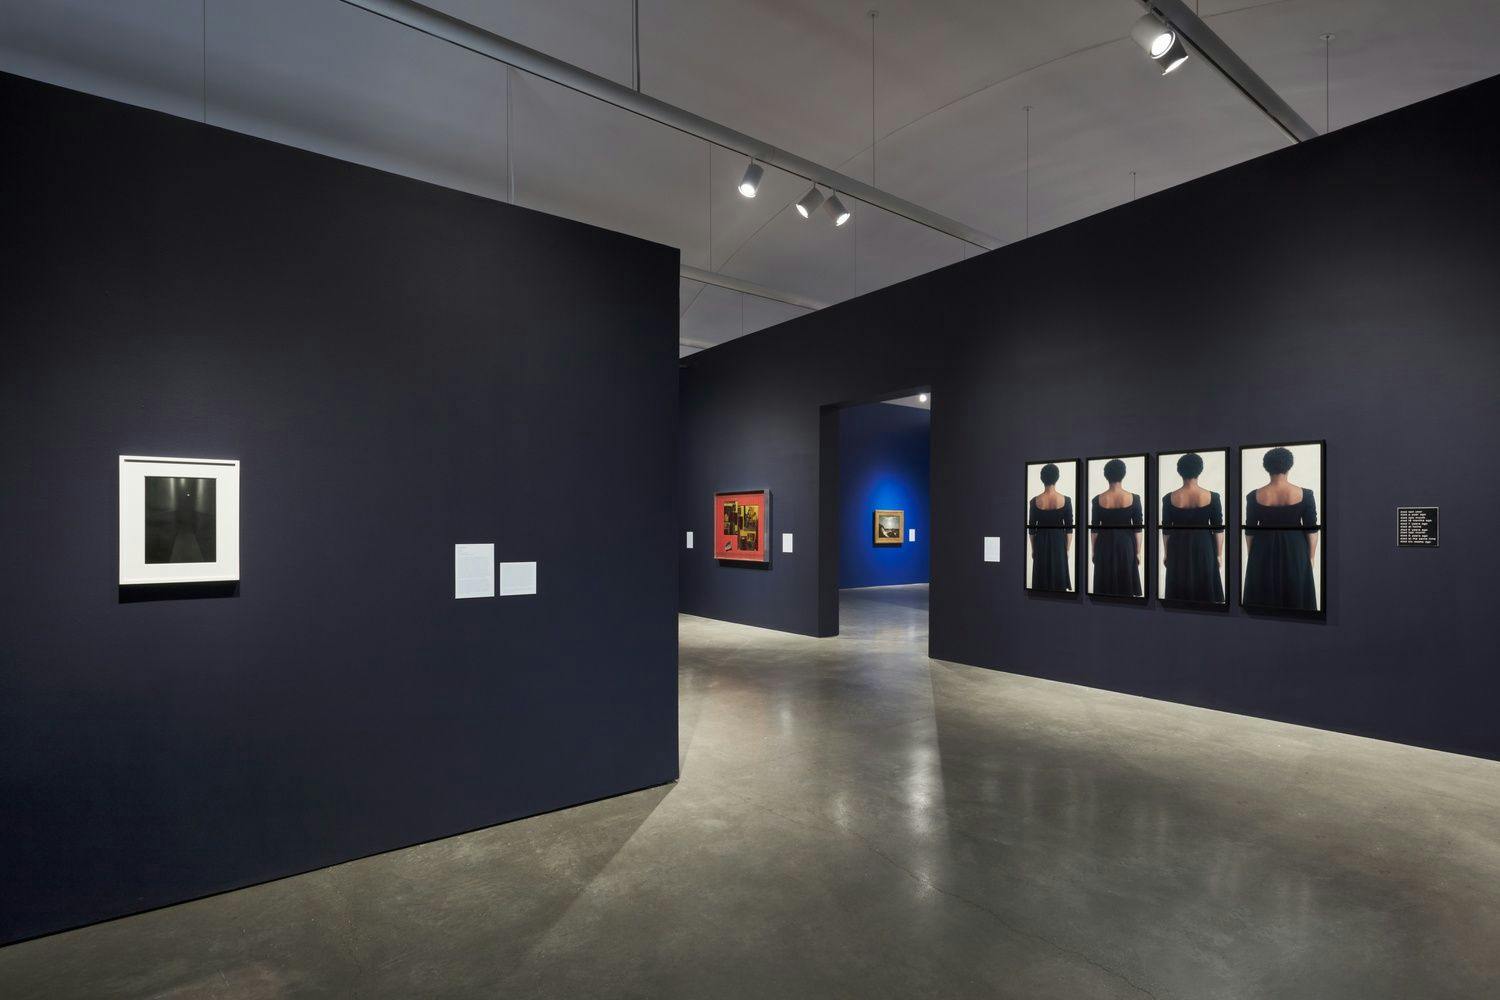 Installation View of the exhibition Black Melancholia at the Hessel Museum of Art, Center for Curatorial Studies at Bard College, in Annandale-on-Hudson, New York, dated 2022.